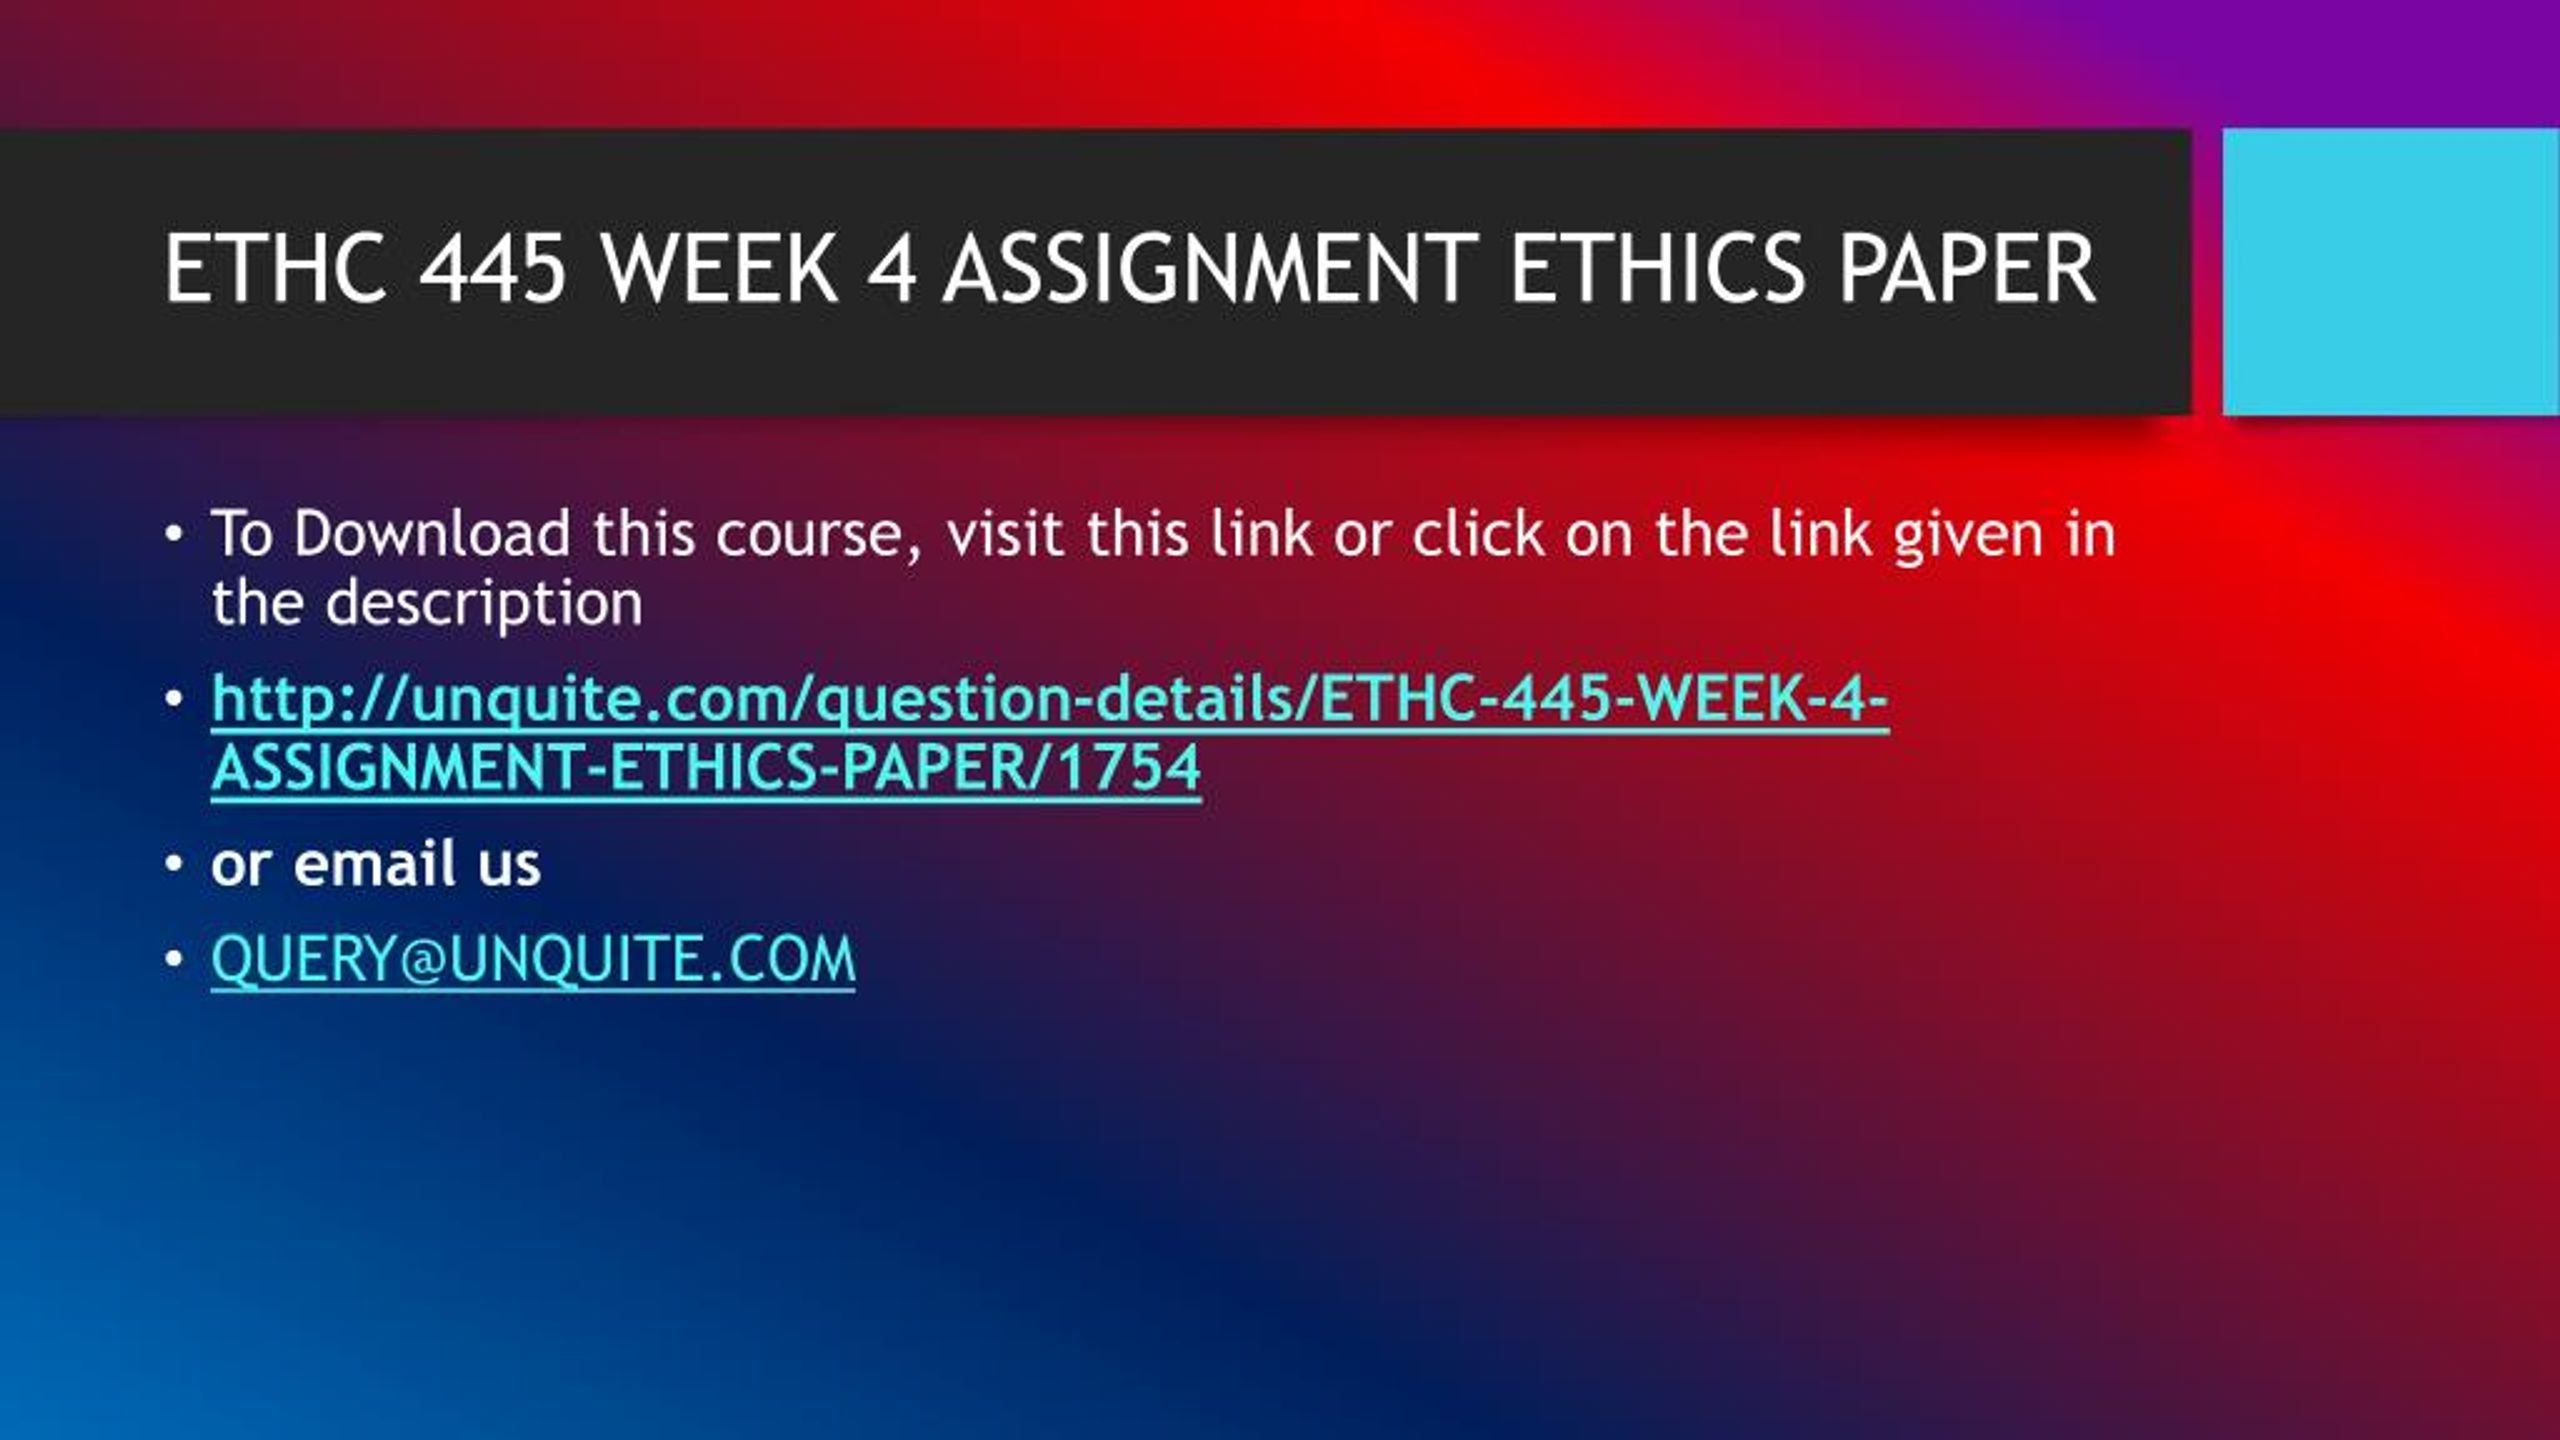 assignment 4 ethics (part 1 of 2)